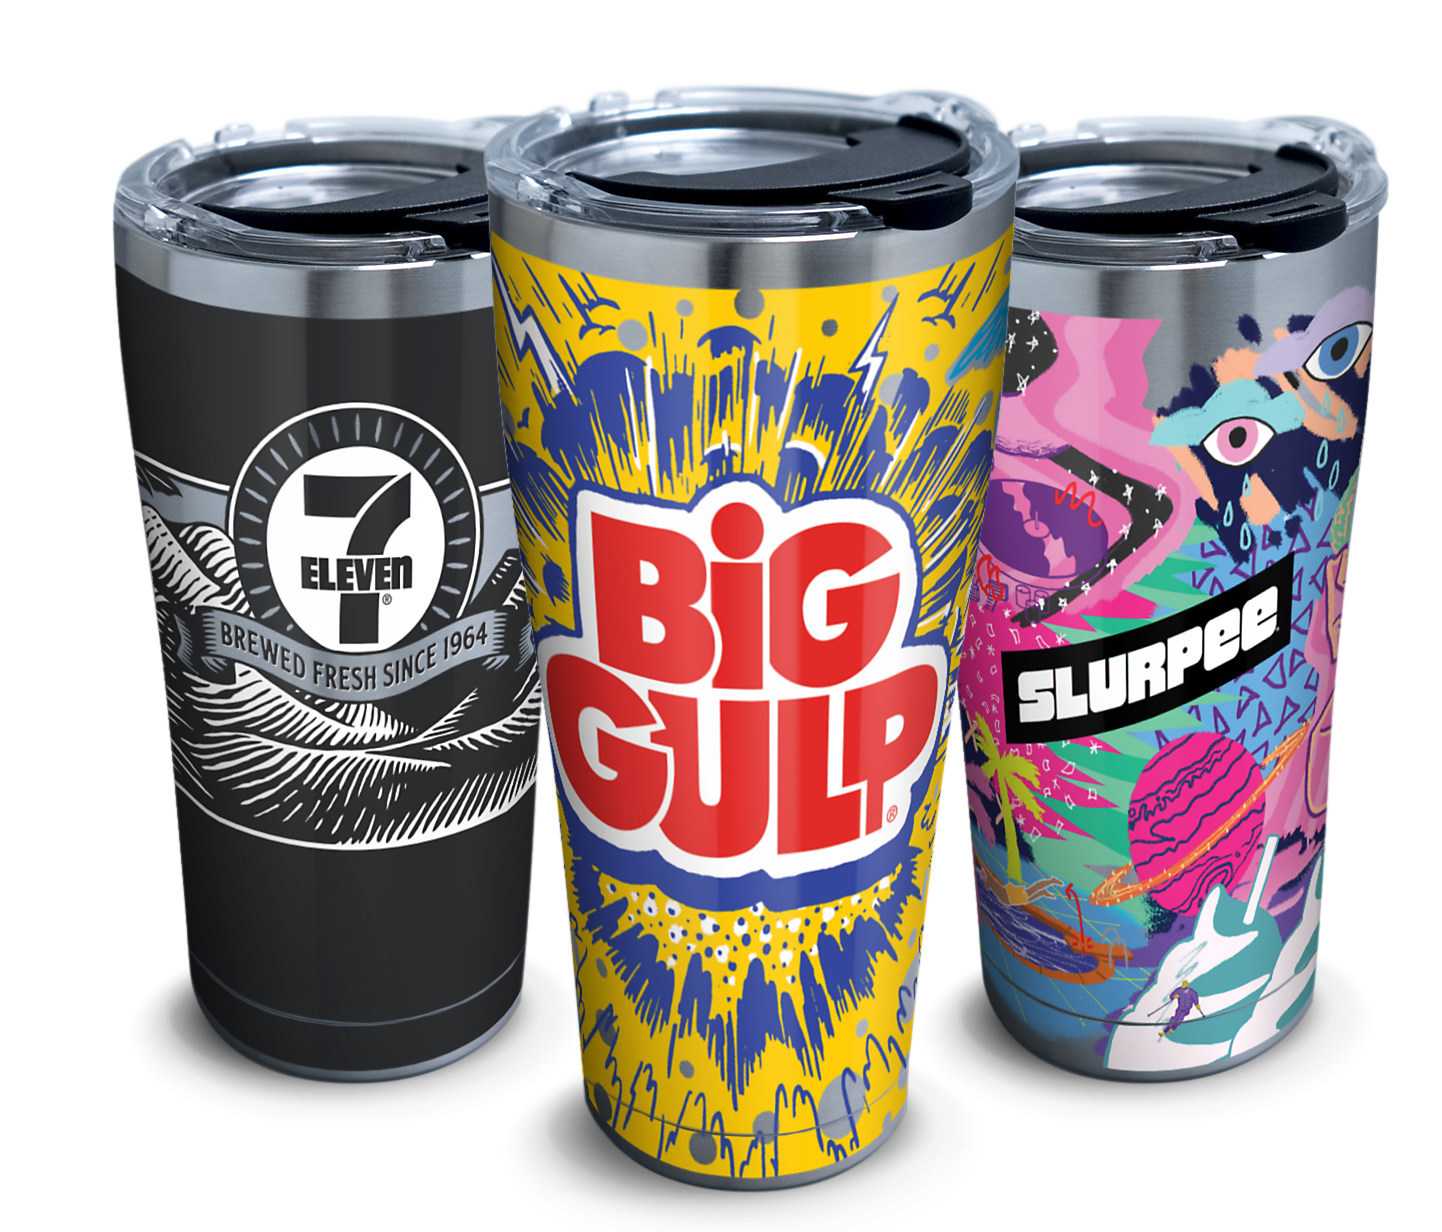 7-Eleven, Inc. is offering limited-edition cups for each of its signature p...